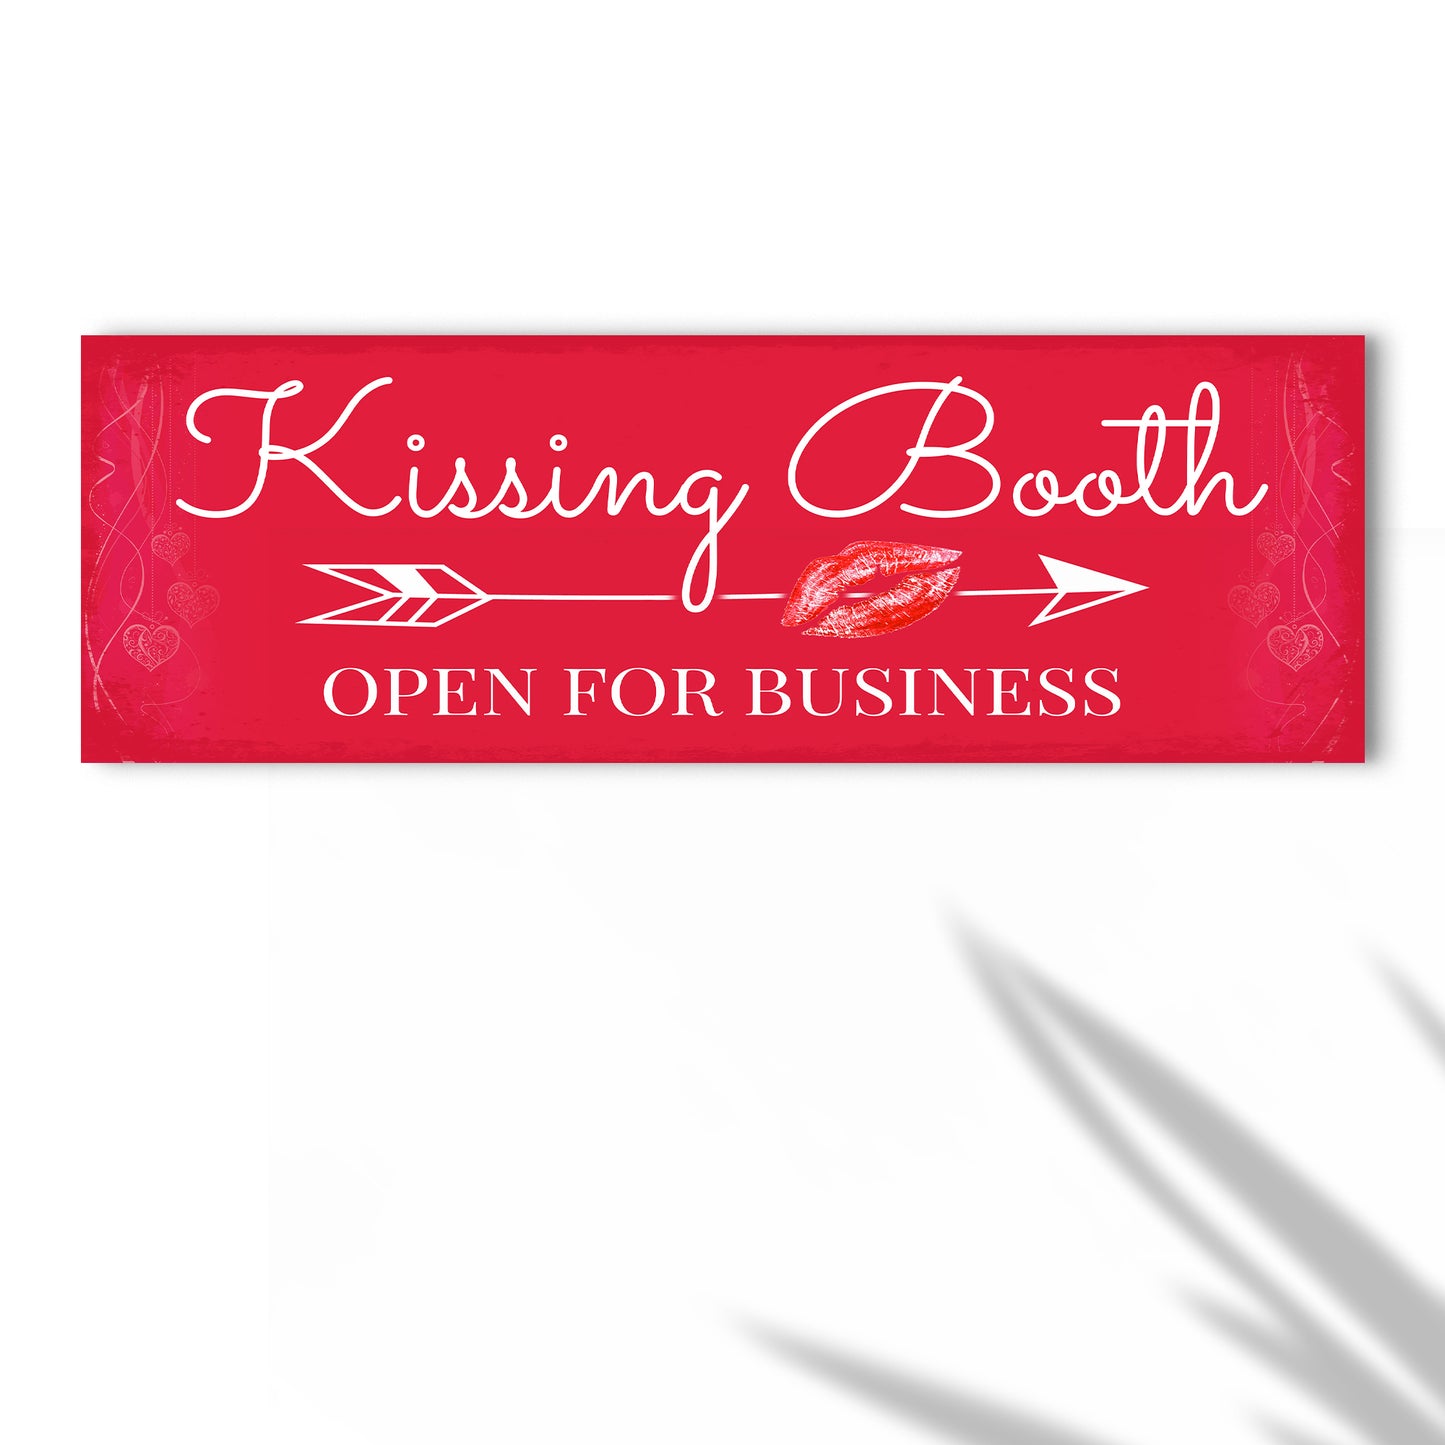 Kissing Booth "Open For Business" Sign Style 1 - Image by Tailored Canvases